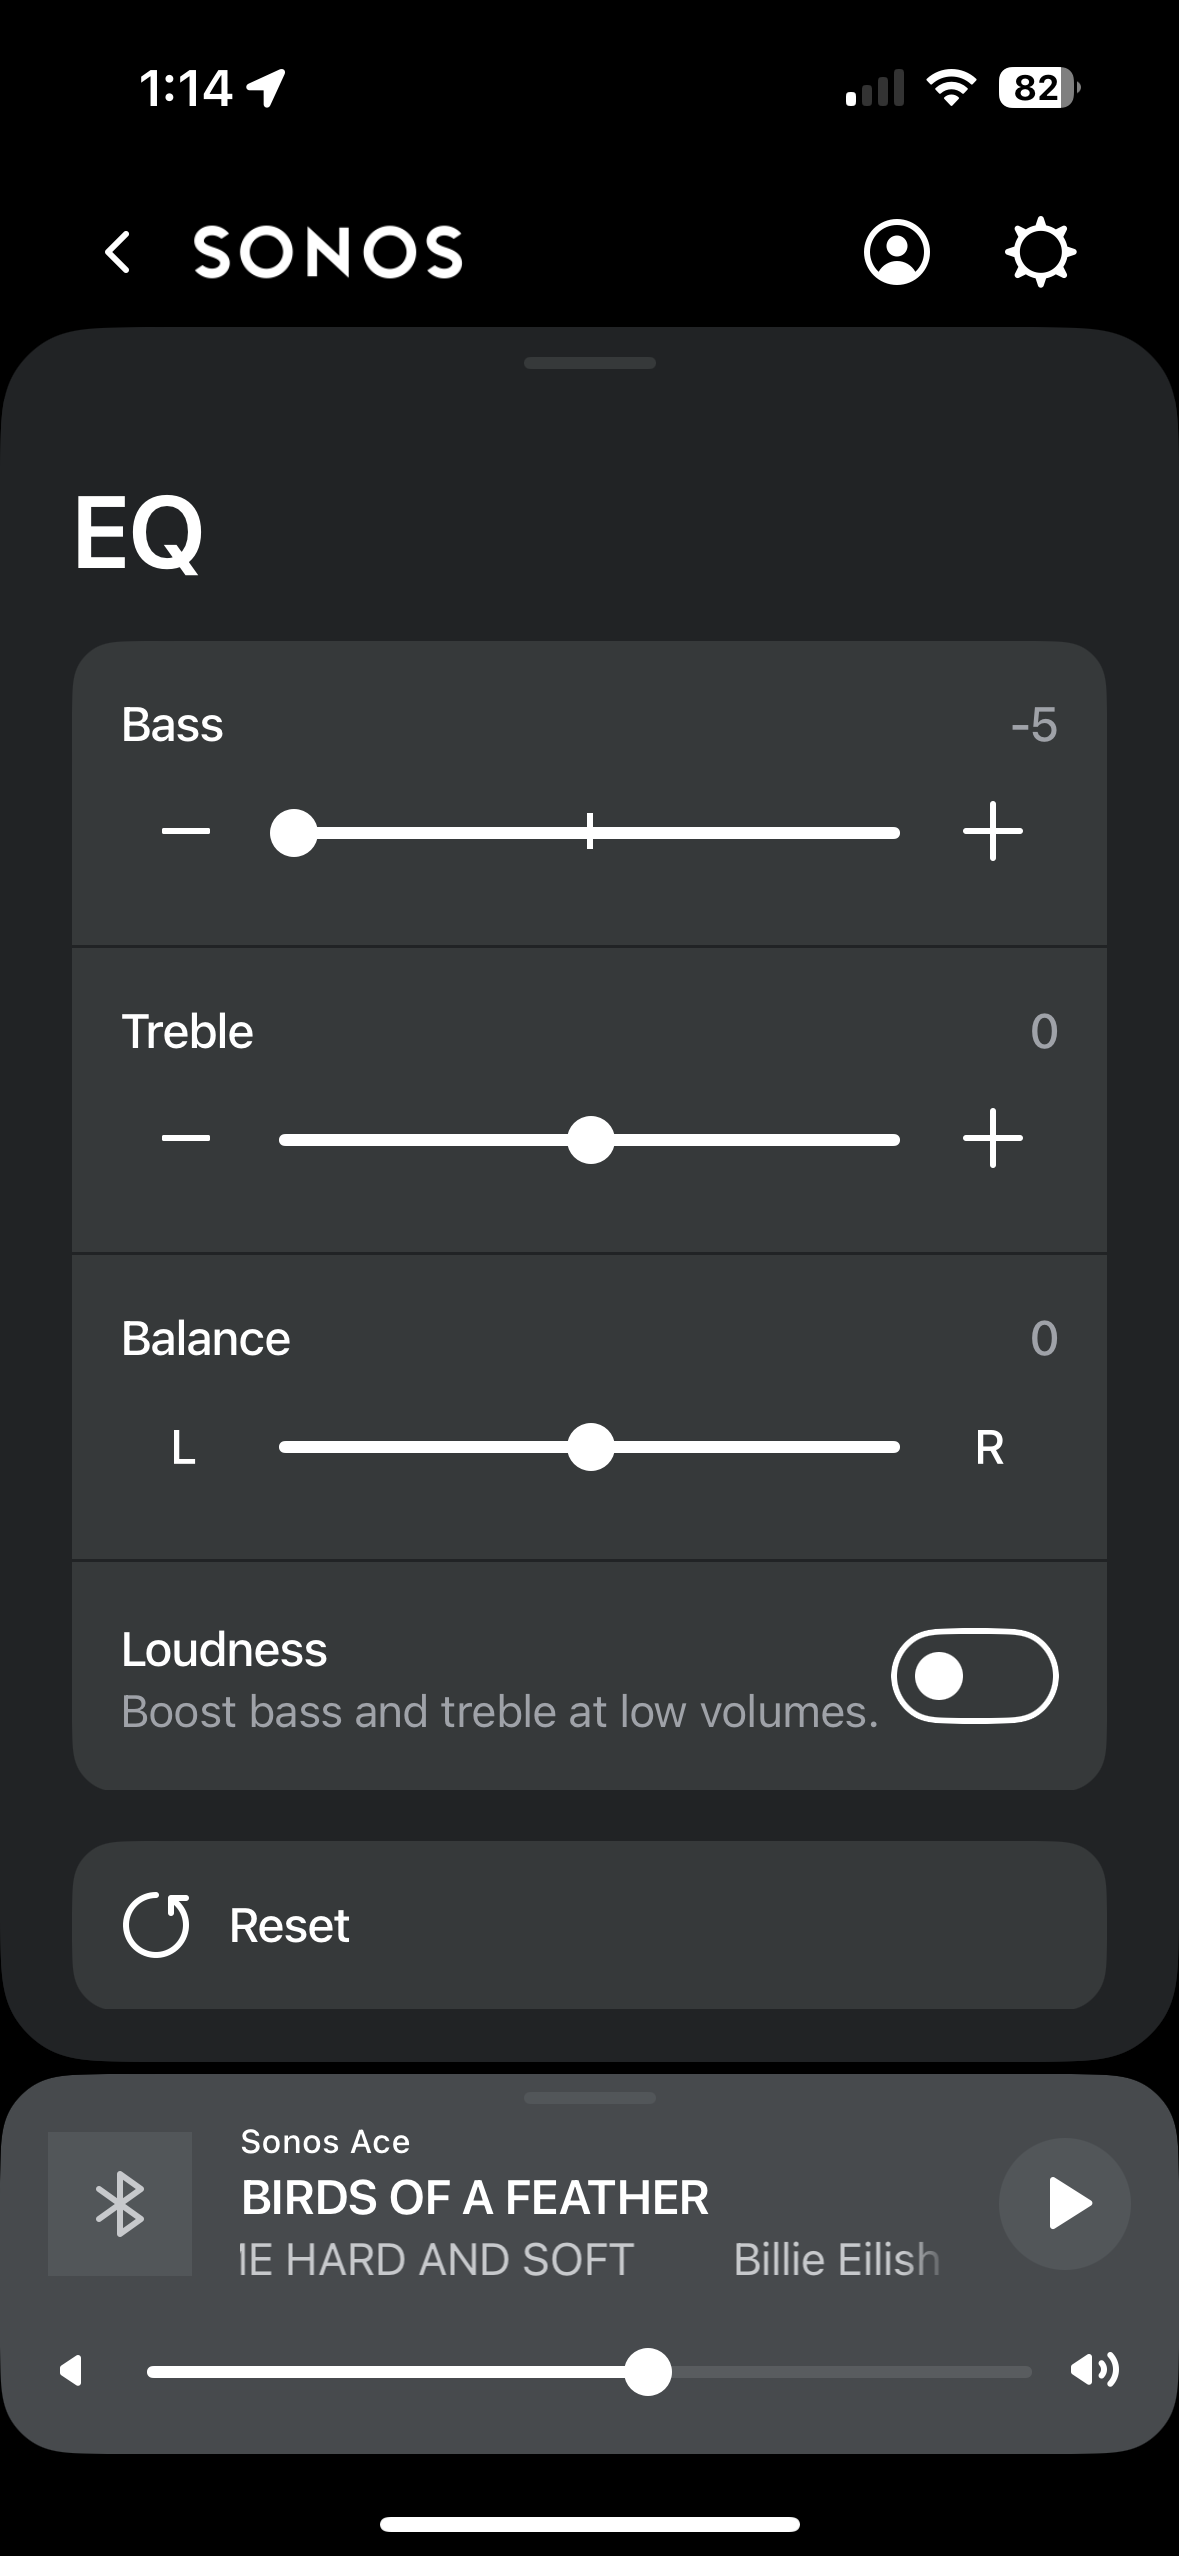 Sonos App interface showing equalizer controls for the Sonos Ace headphones.